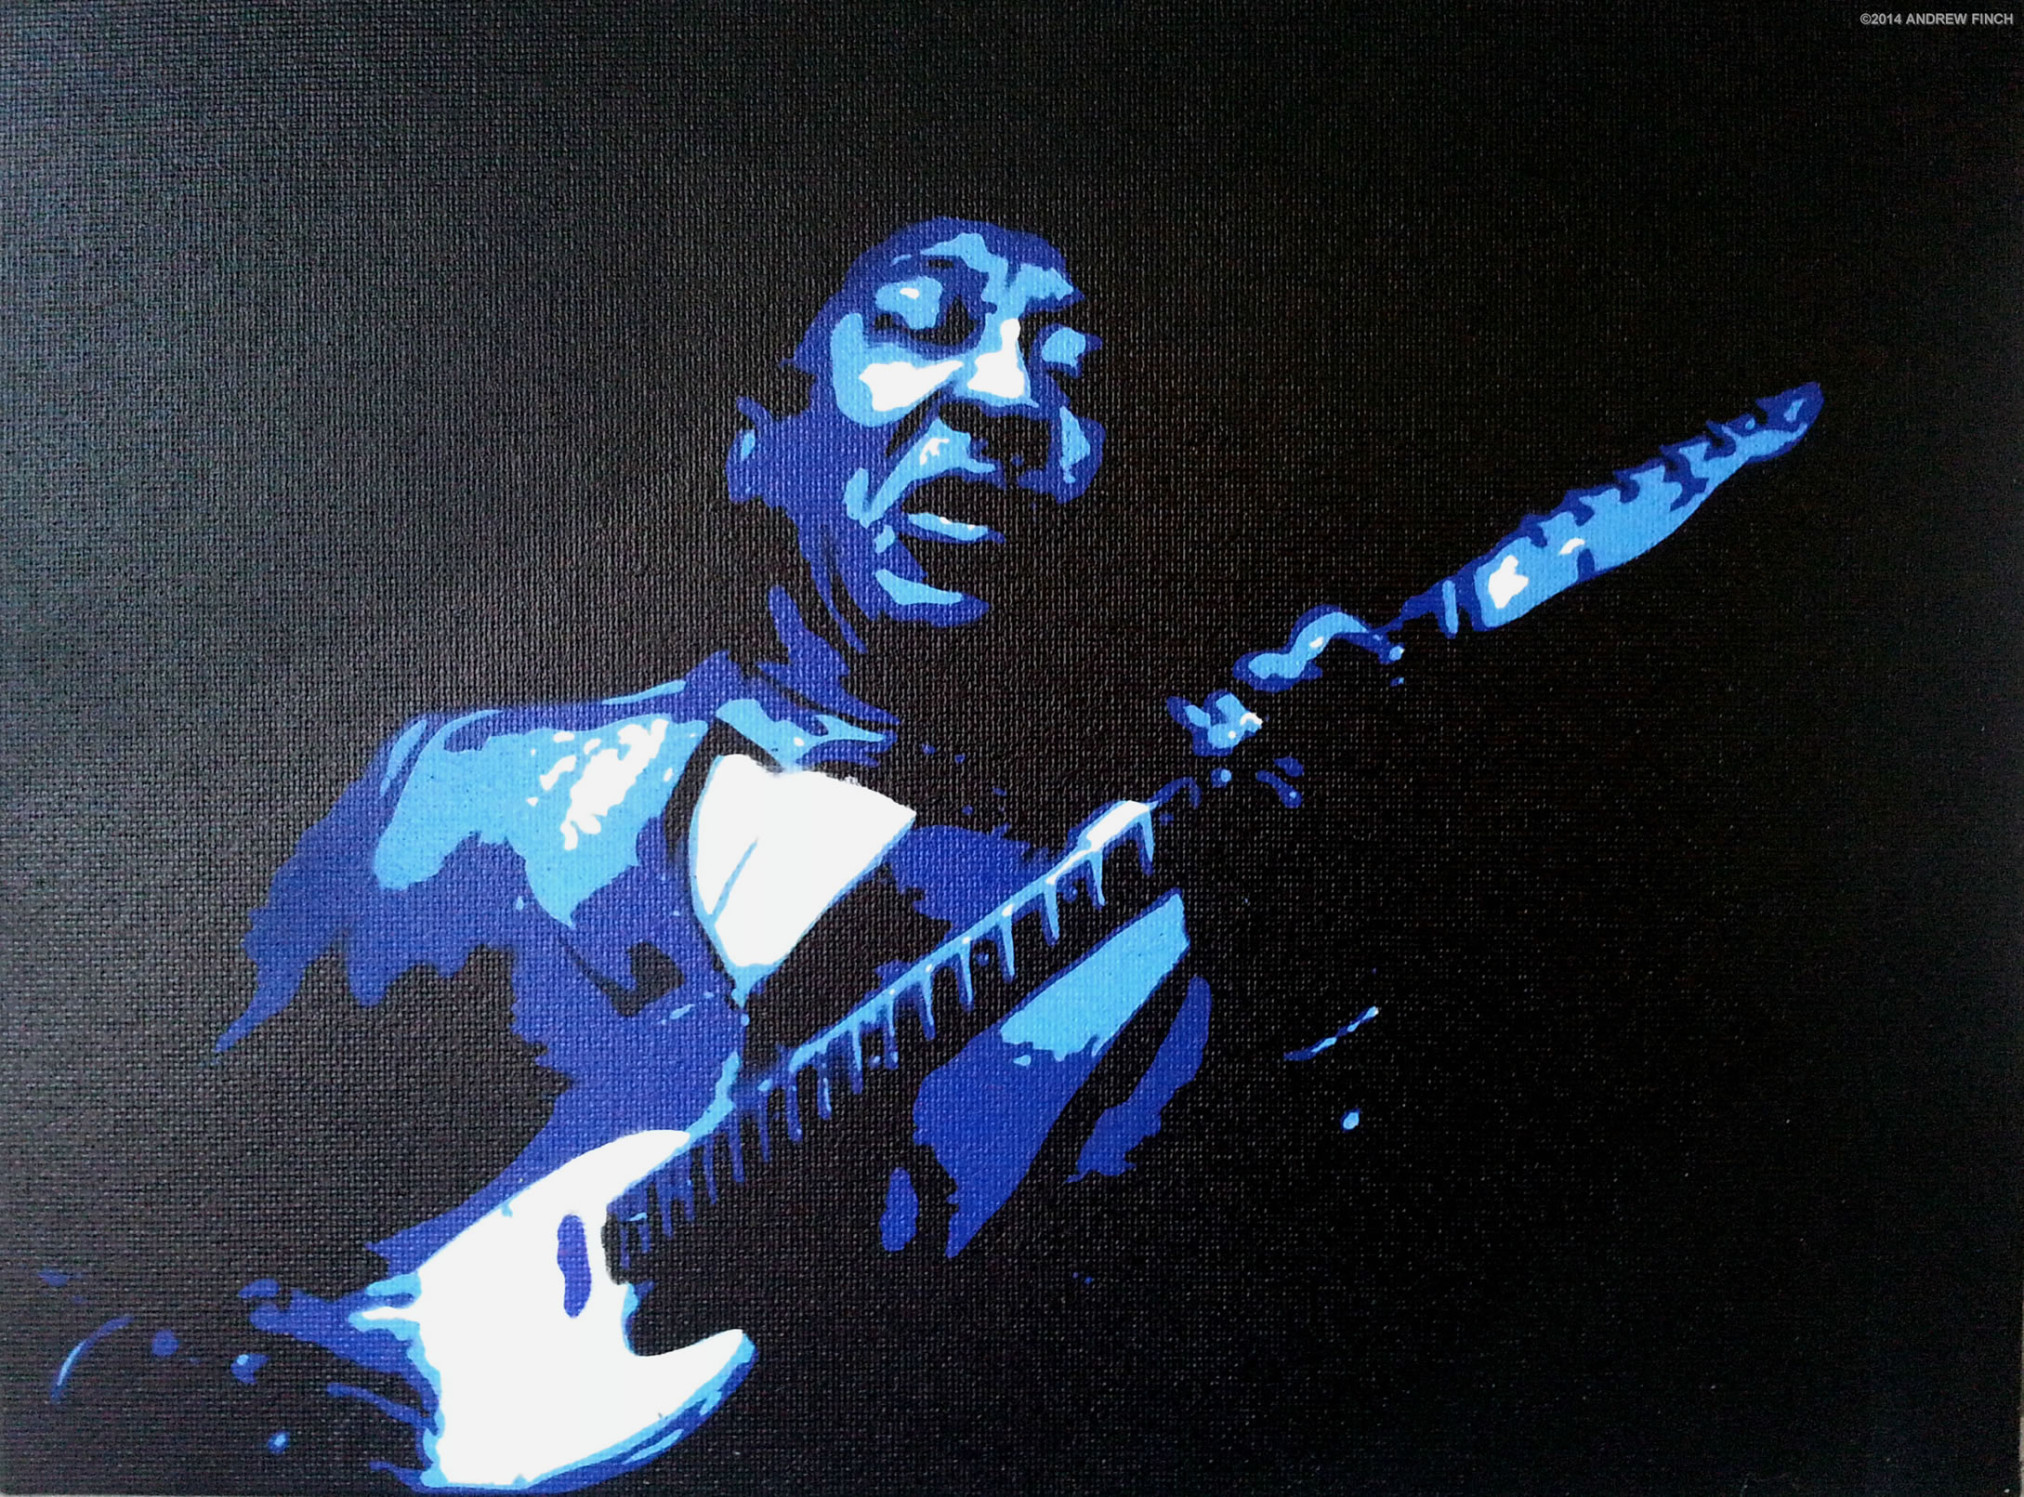 Muddy Waters - Spray painted by Andrew Finch